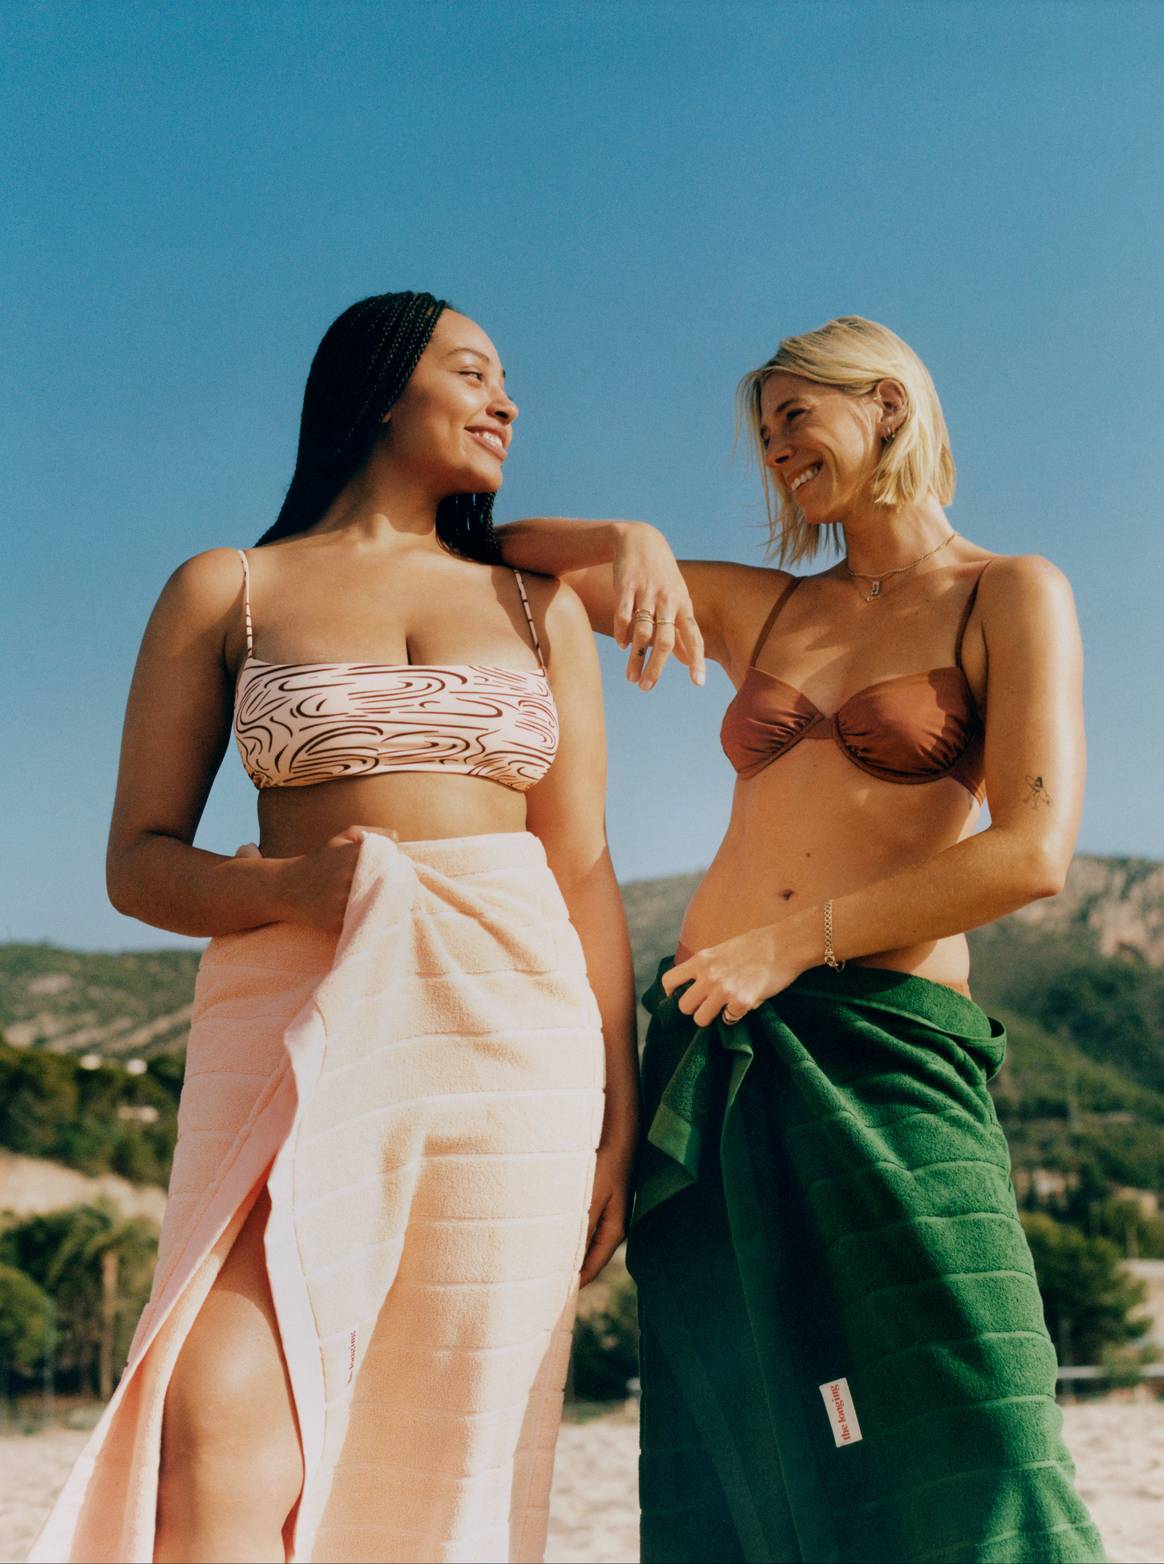 Whistles x The Longing high summer swim collection